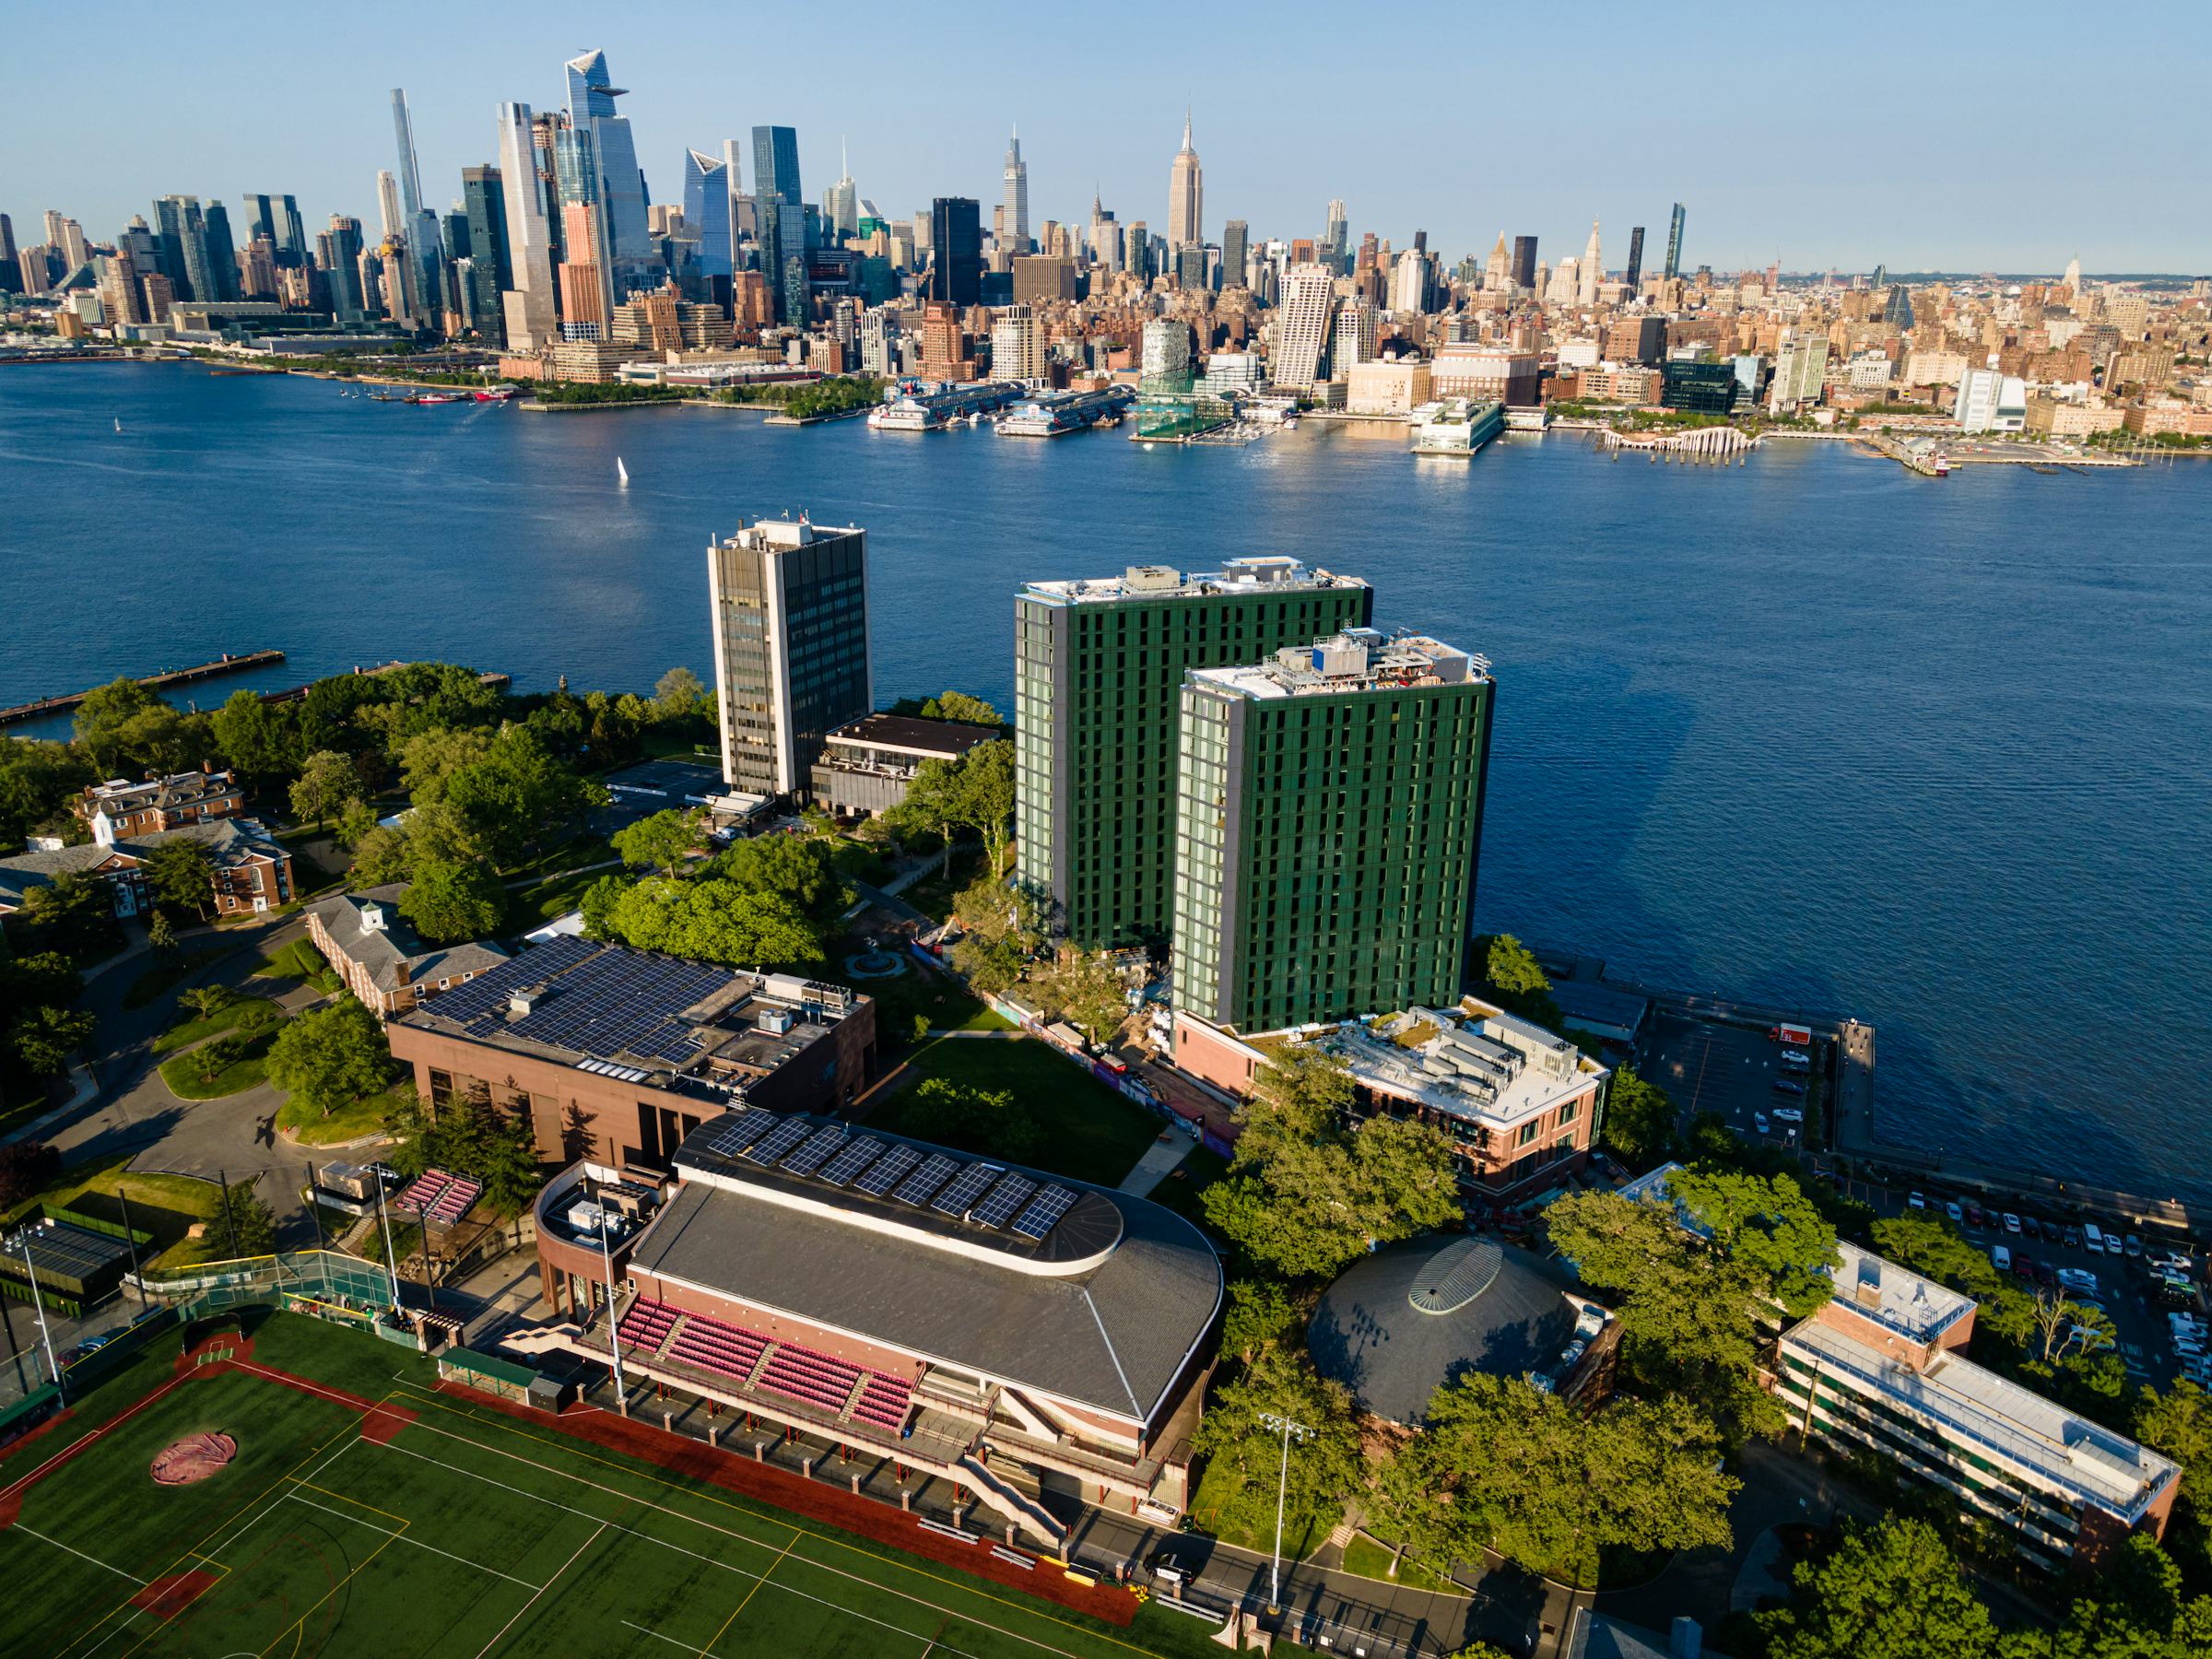 Aerial image of the Stevens Institute of Technology campus.